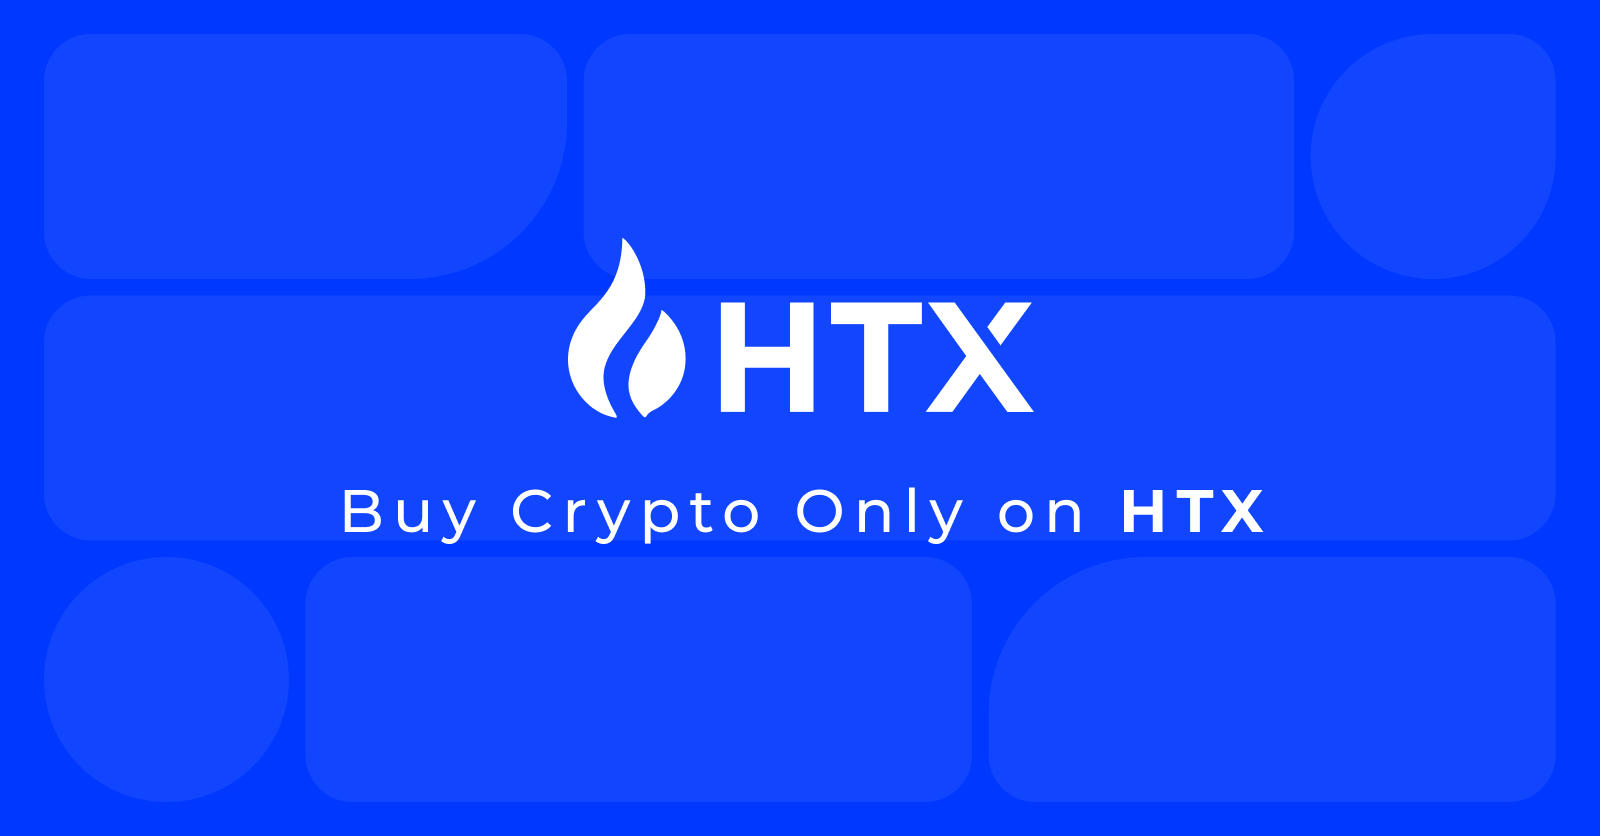 HTX has achieved significant success in four new tracks in the cryptocurrency market: AI, BRC20, MEME, and New Public Chains